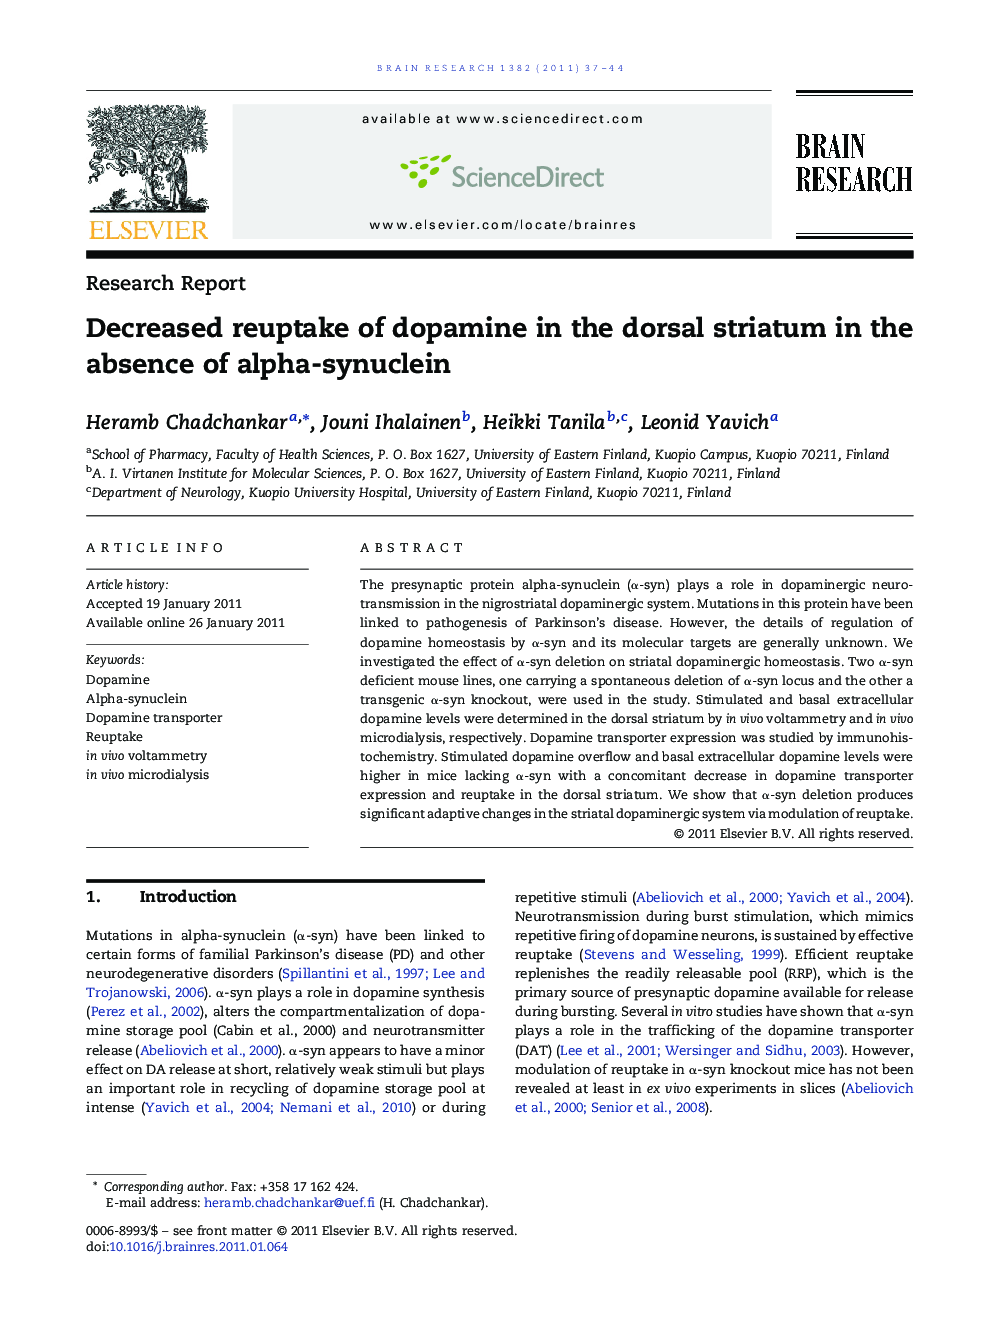 Research ReportDecreased reuptake of dopamine in the dorsal striatum in the absence of alpha-synuclein